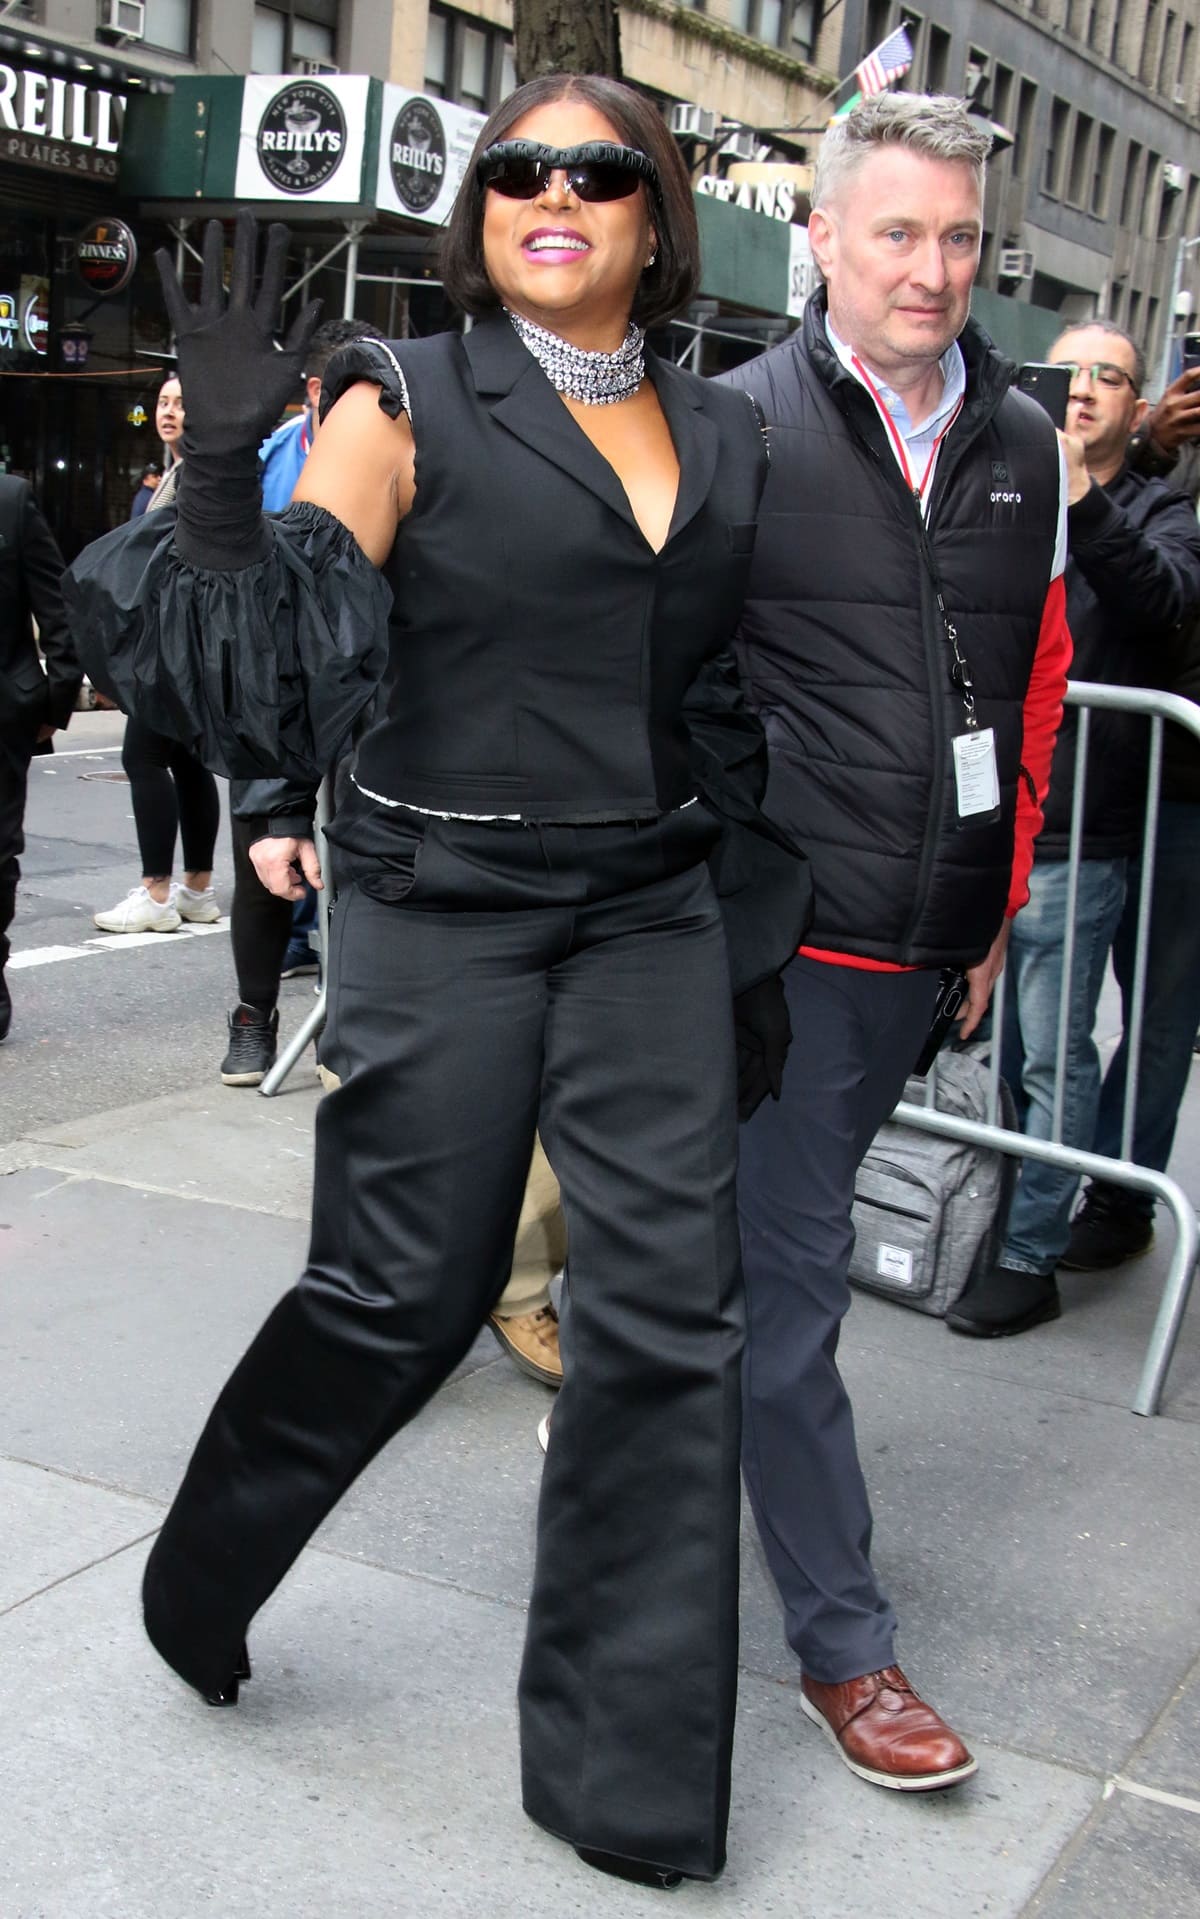 Taraji P. Henson arrived to tape an episode of The View in New York City in a black jumpsuit with a plunging neckline, voluminous elbow-length gloves, and a silver choker necklace